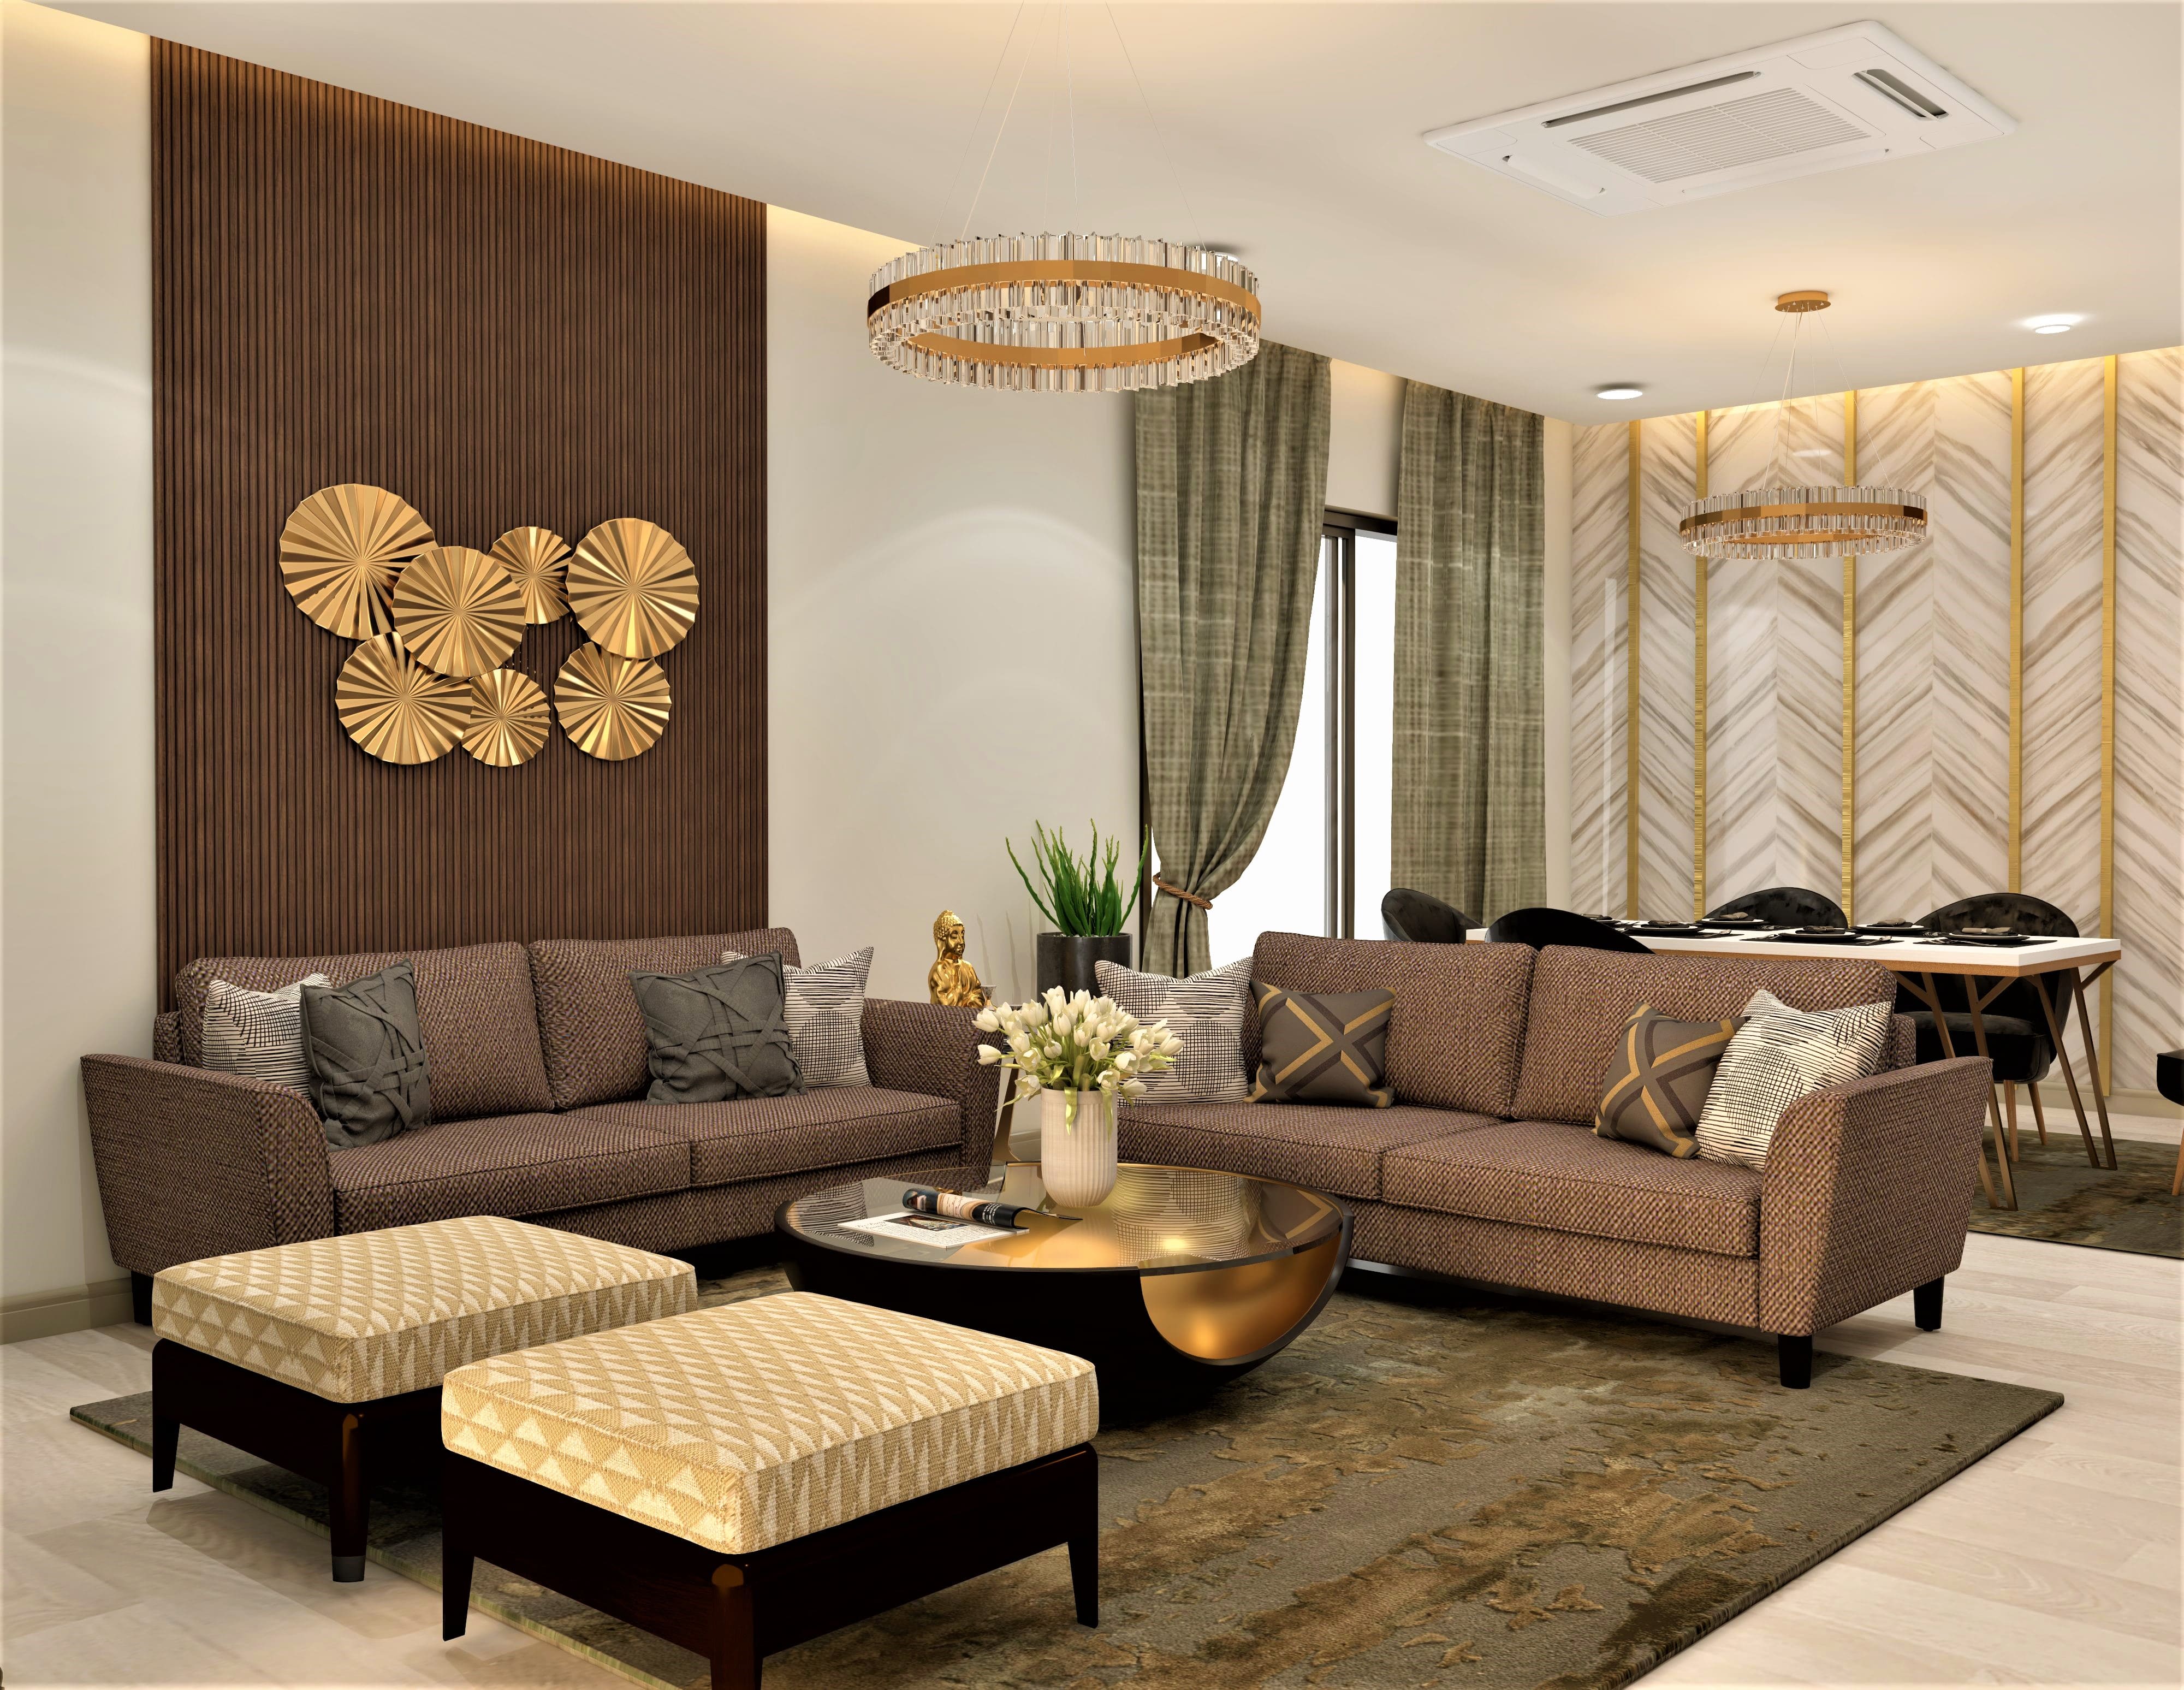 Gold accents complete this elegant living room design - Beautiful Homes